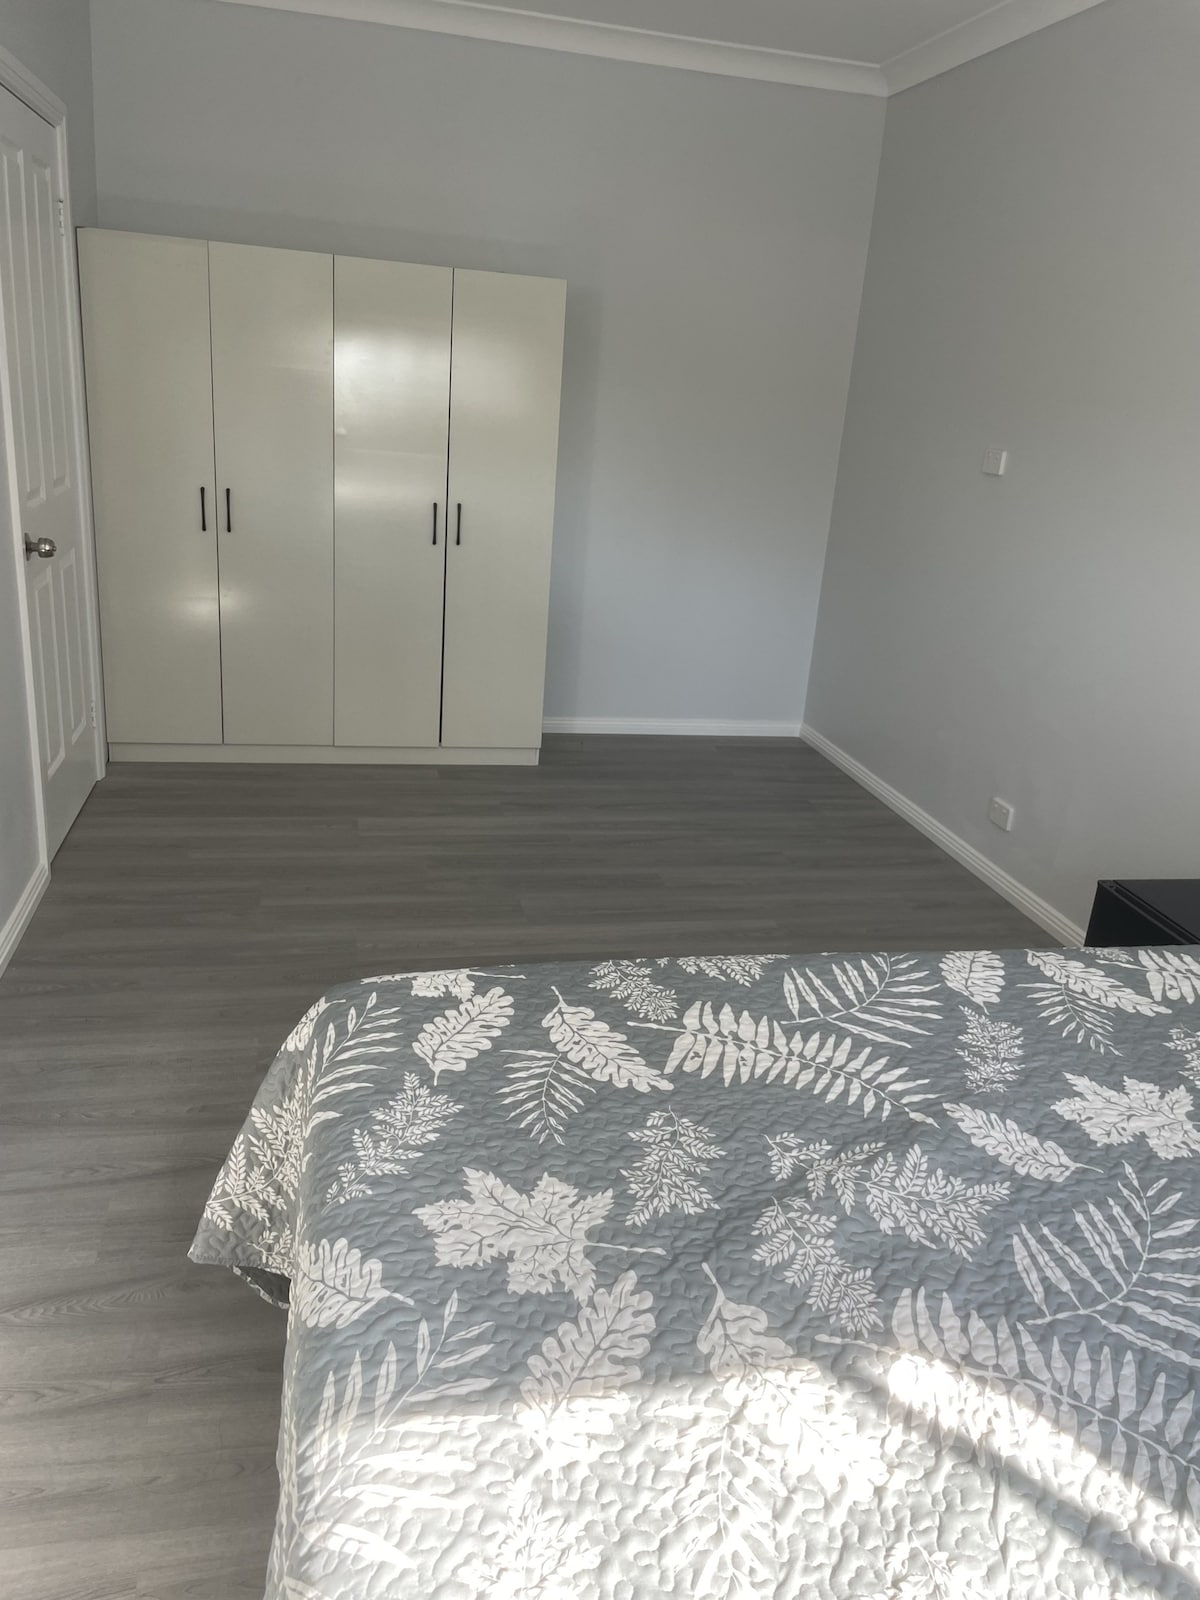 Rooms for Rent
Western Sydney